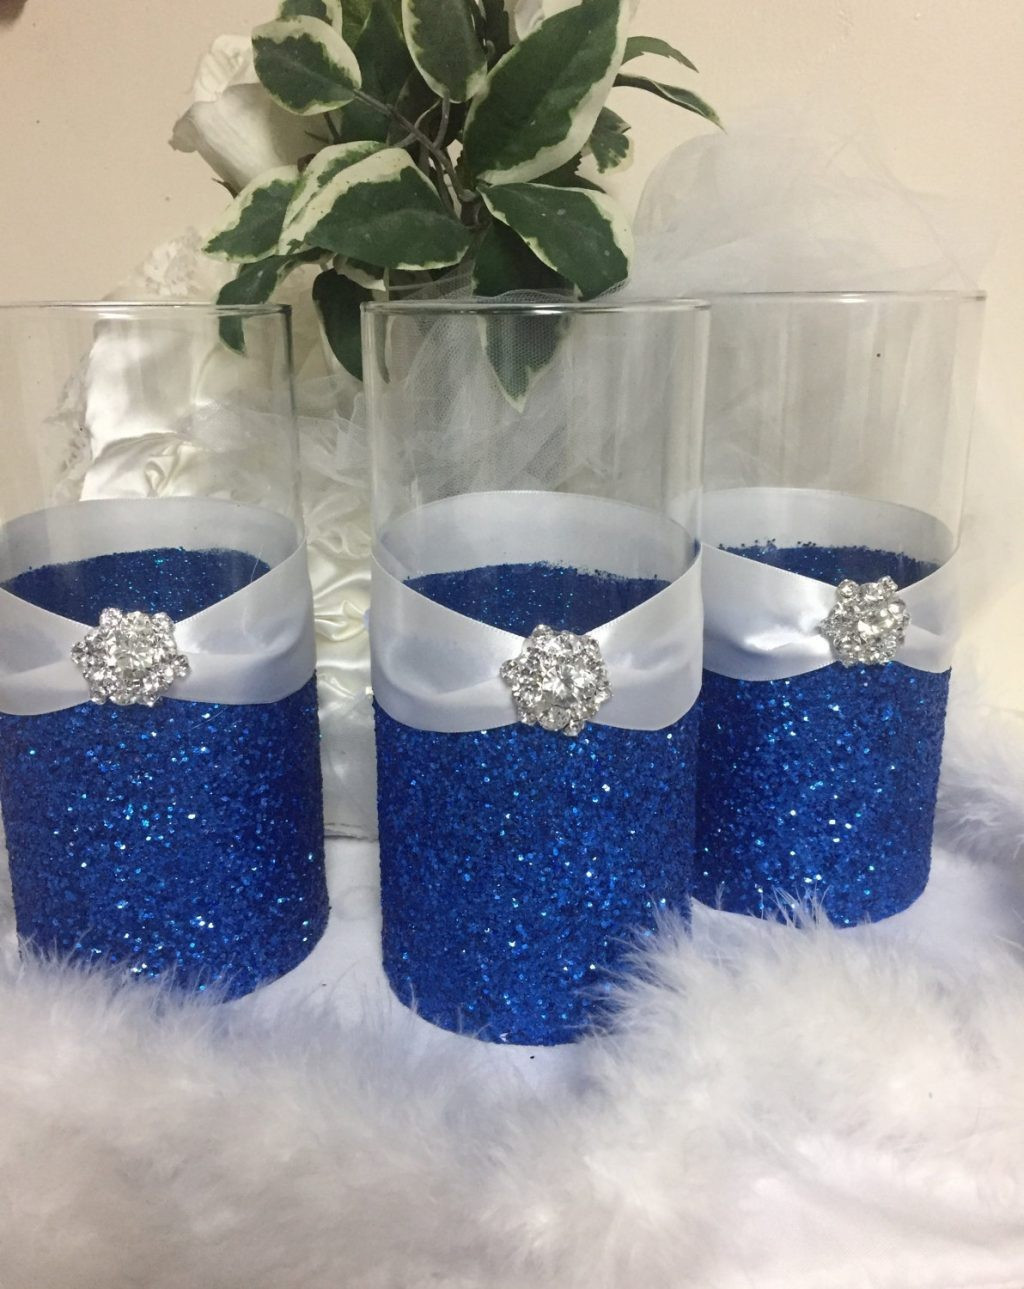 10 Lovable Tall Vase Table Decorations 2024 free download tall vase table decorations of wedding decorations centerpieces beautiful tallh vases glitter vase in wedding decorations centerpieces beautiful tallh vases glitter vase centerpiece diy vase